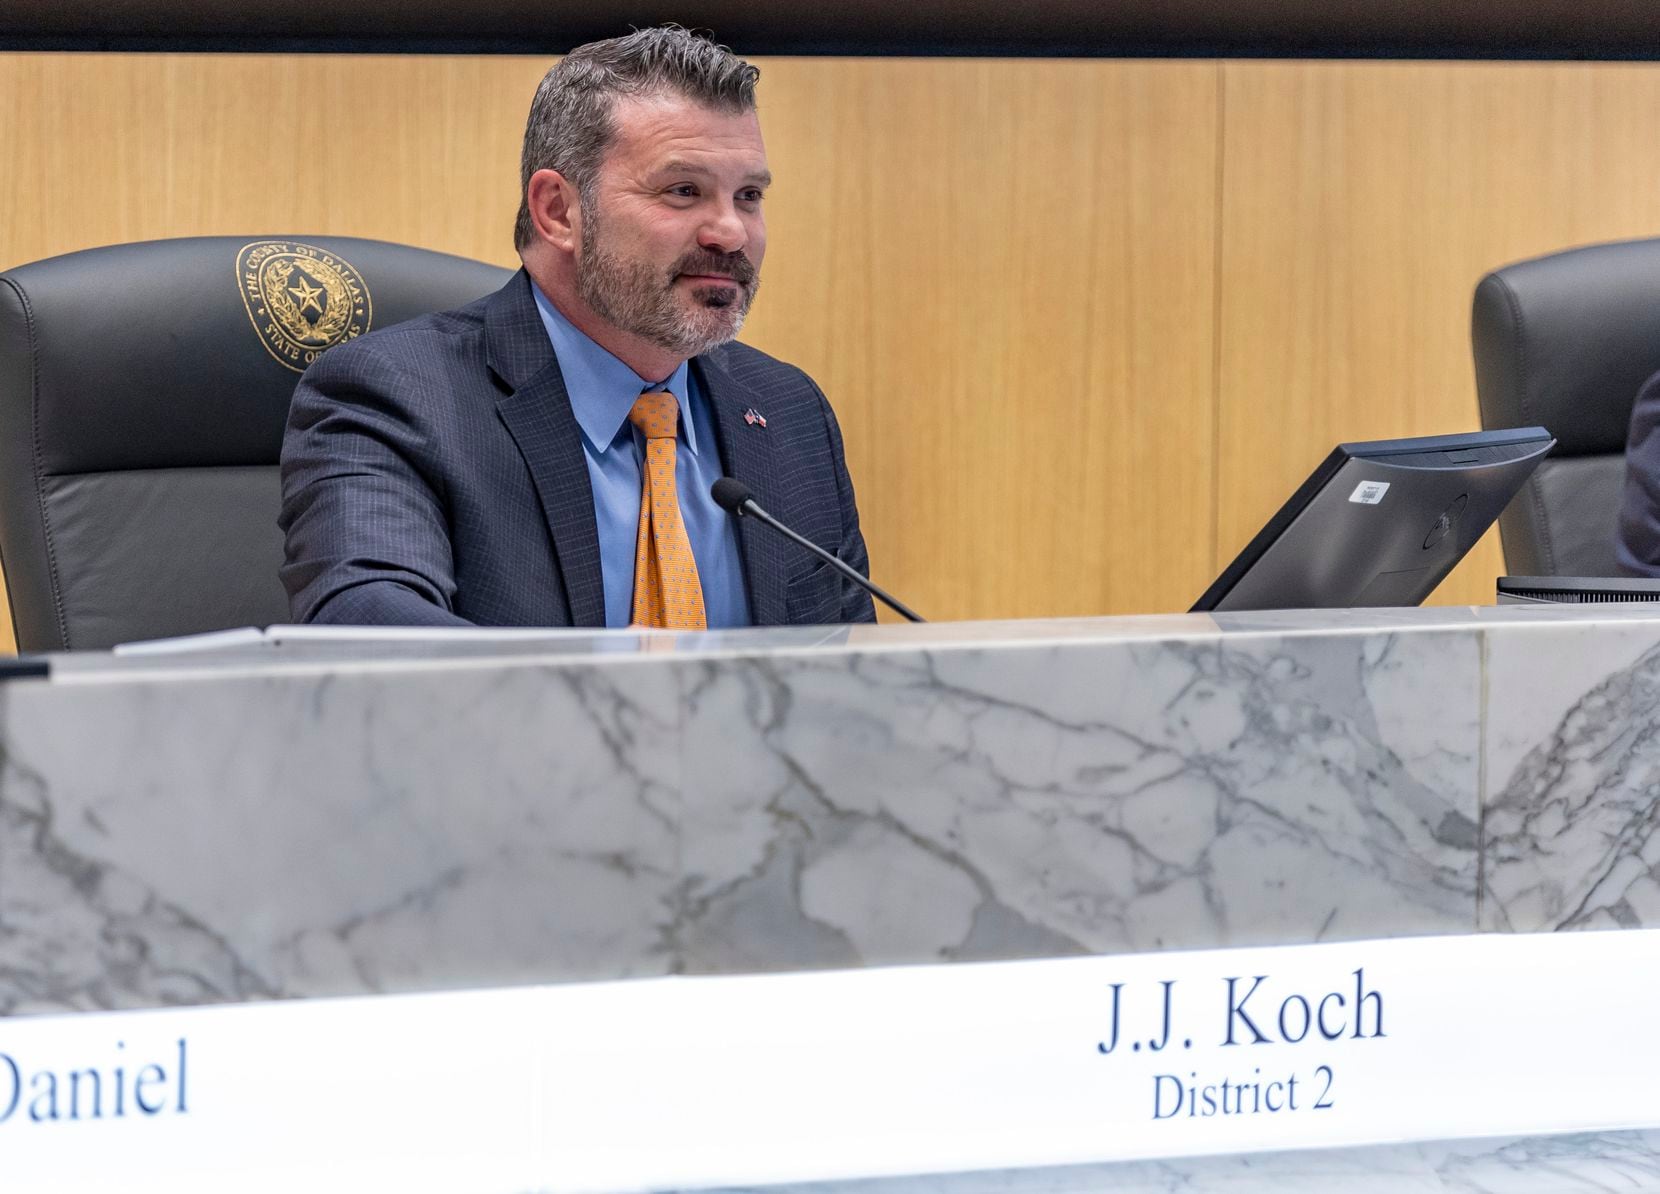 Dallas County Commissioner J.J. Koch, District 2, is up for re-election.